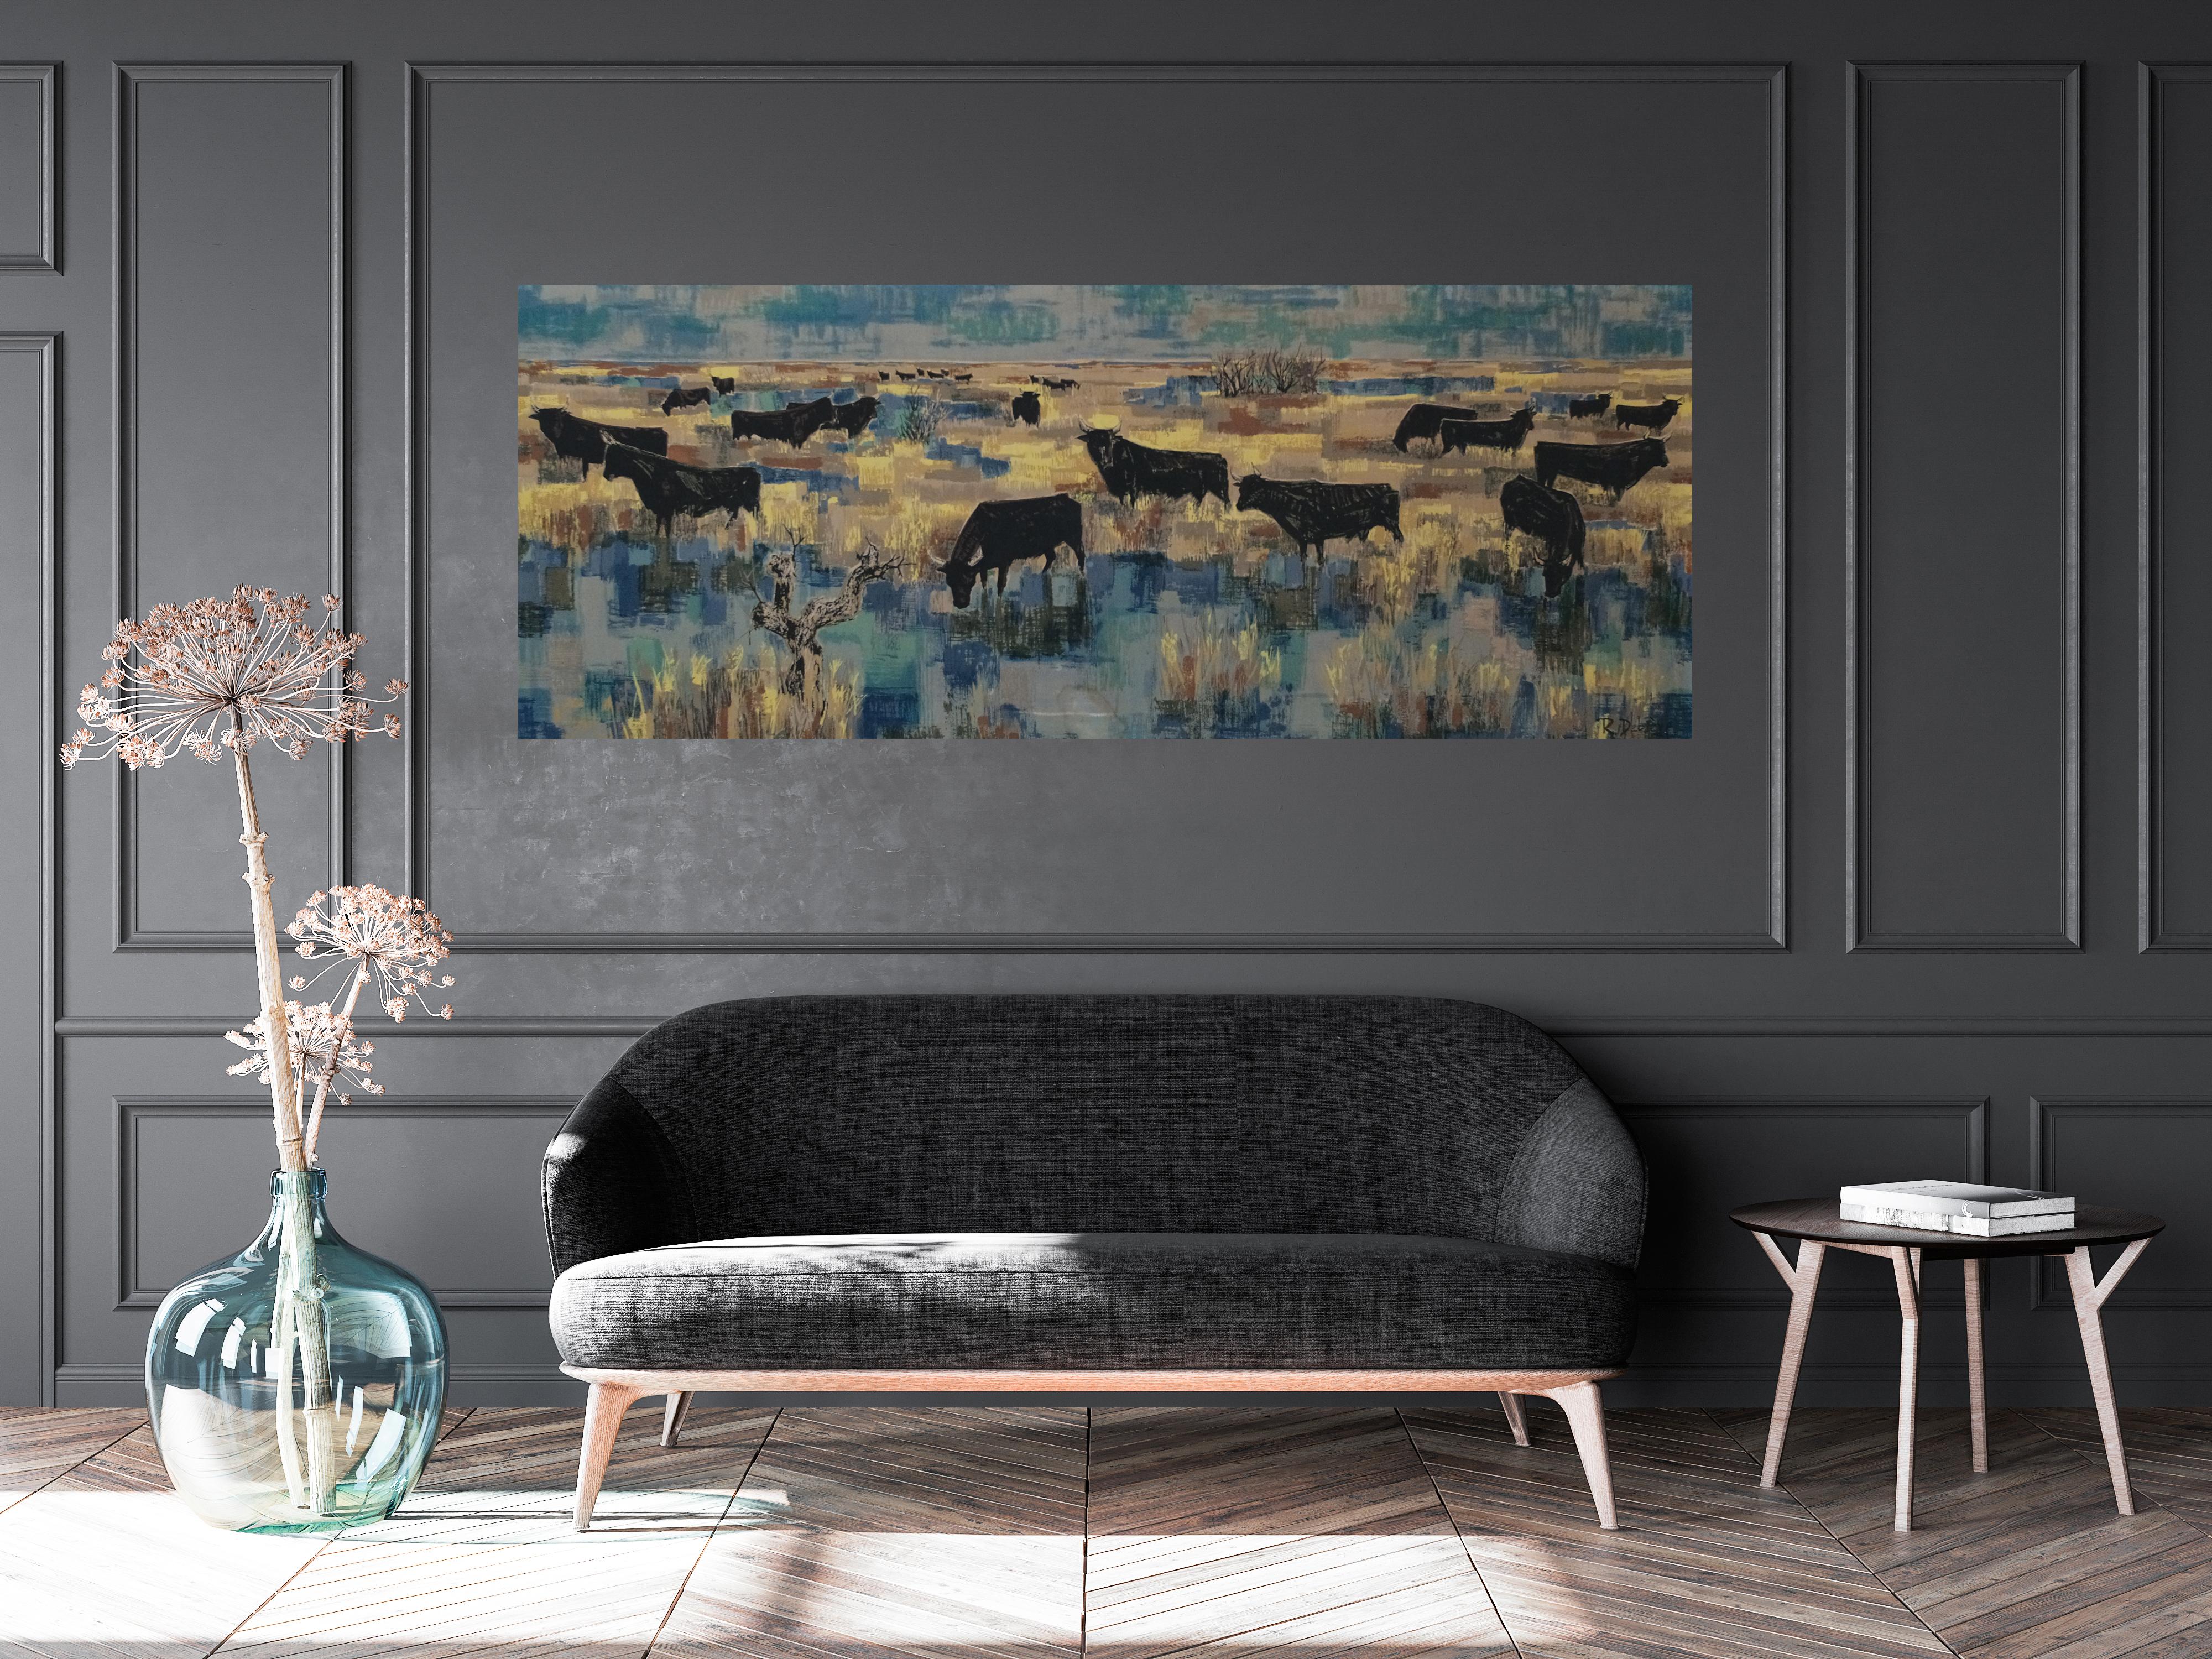 Mid-Century Modern Stretched Midcentury Cotton Tapestry by Debieve Depicting The Camargue Bulls